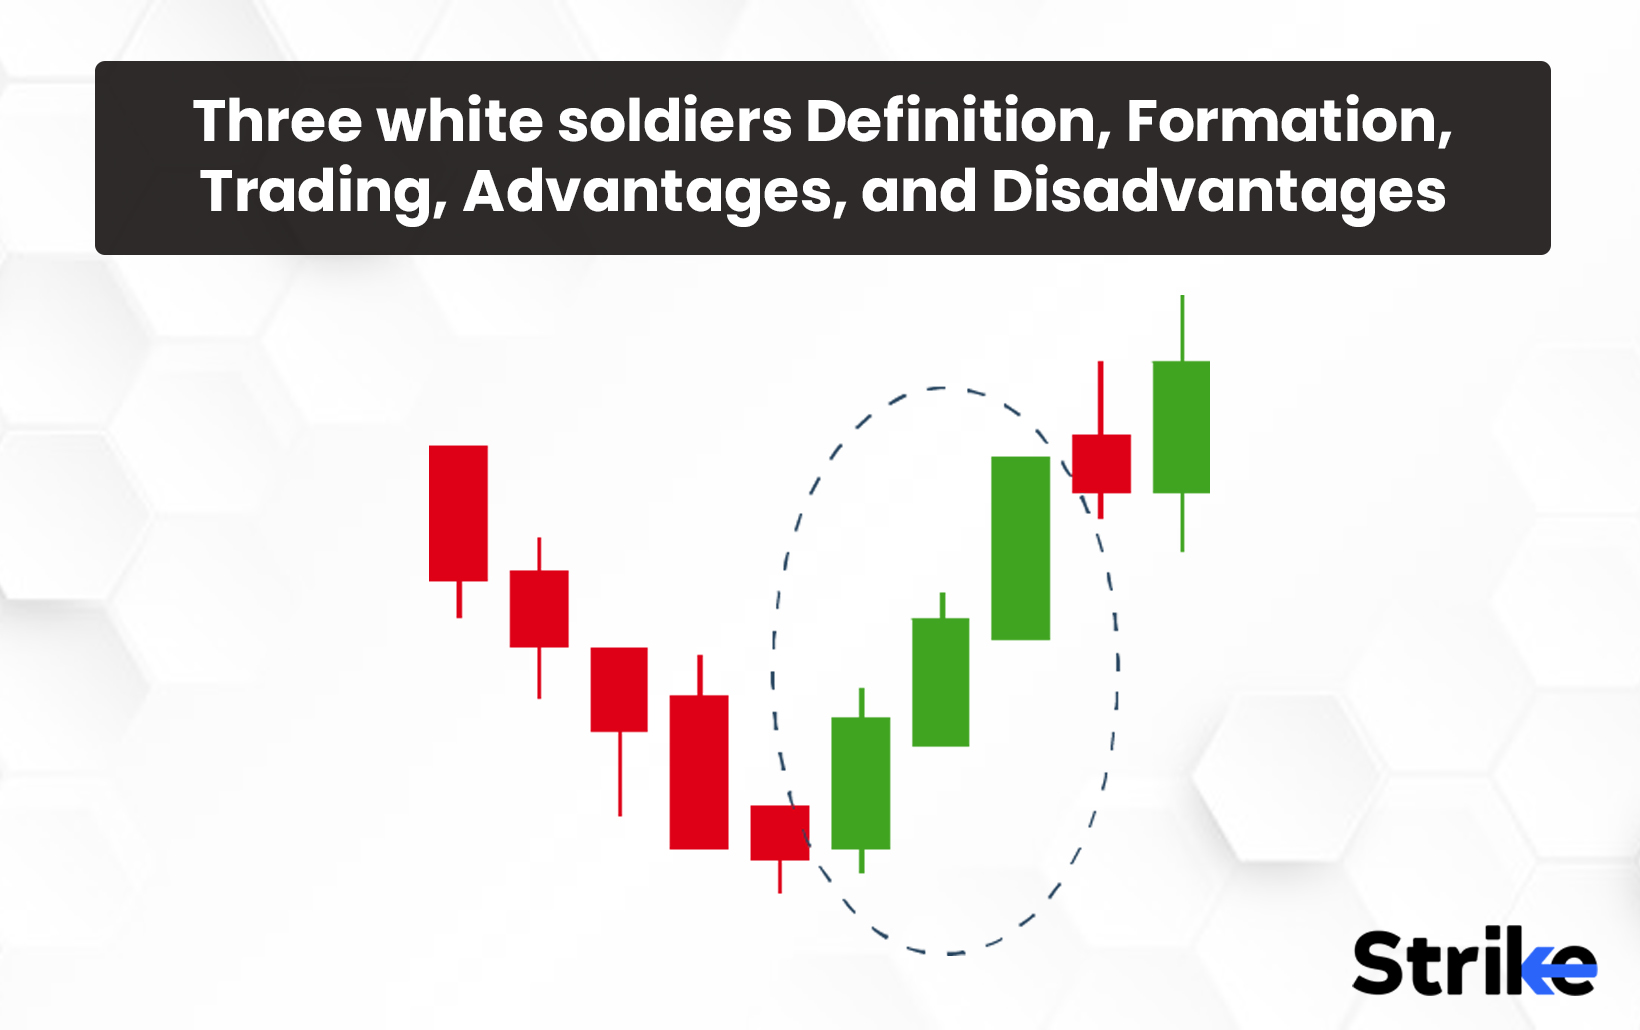 Three white soldiers: Definition, Formation, Trading, Advantages, and Disadvantages